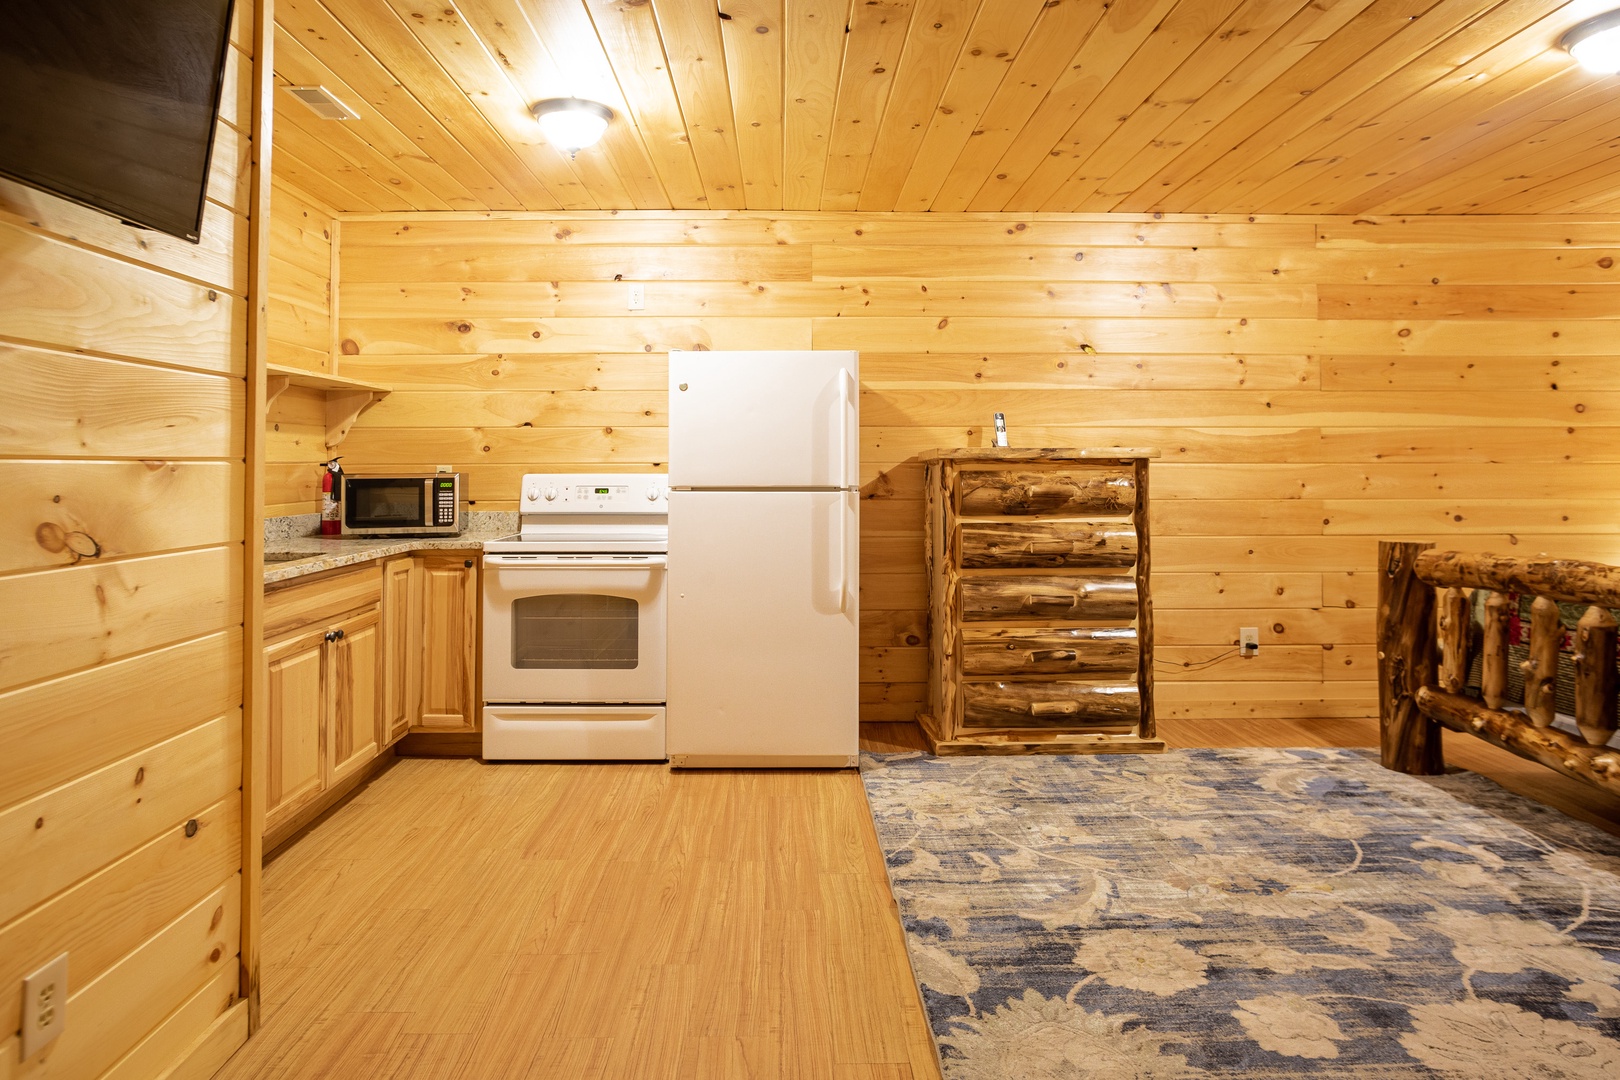 Second Kitchen at 3 Crazy Cubs, a 5 bedroom cabin rental located in pigeon forge